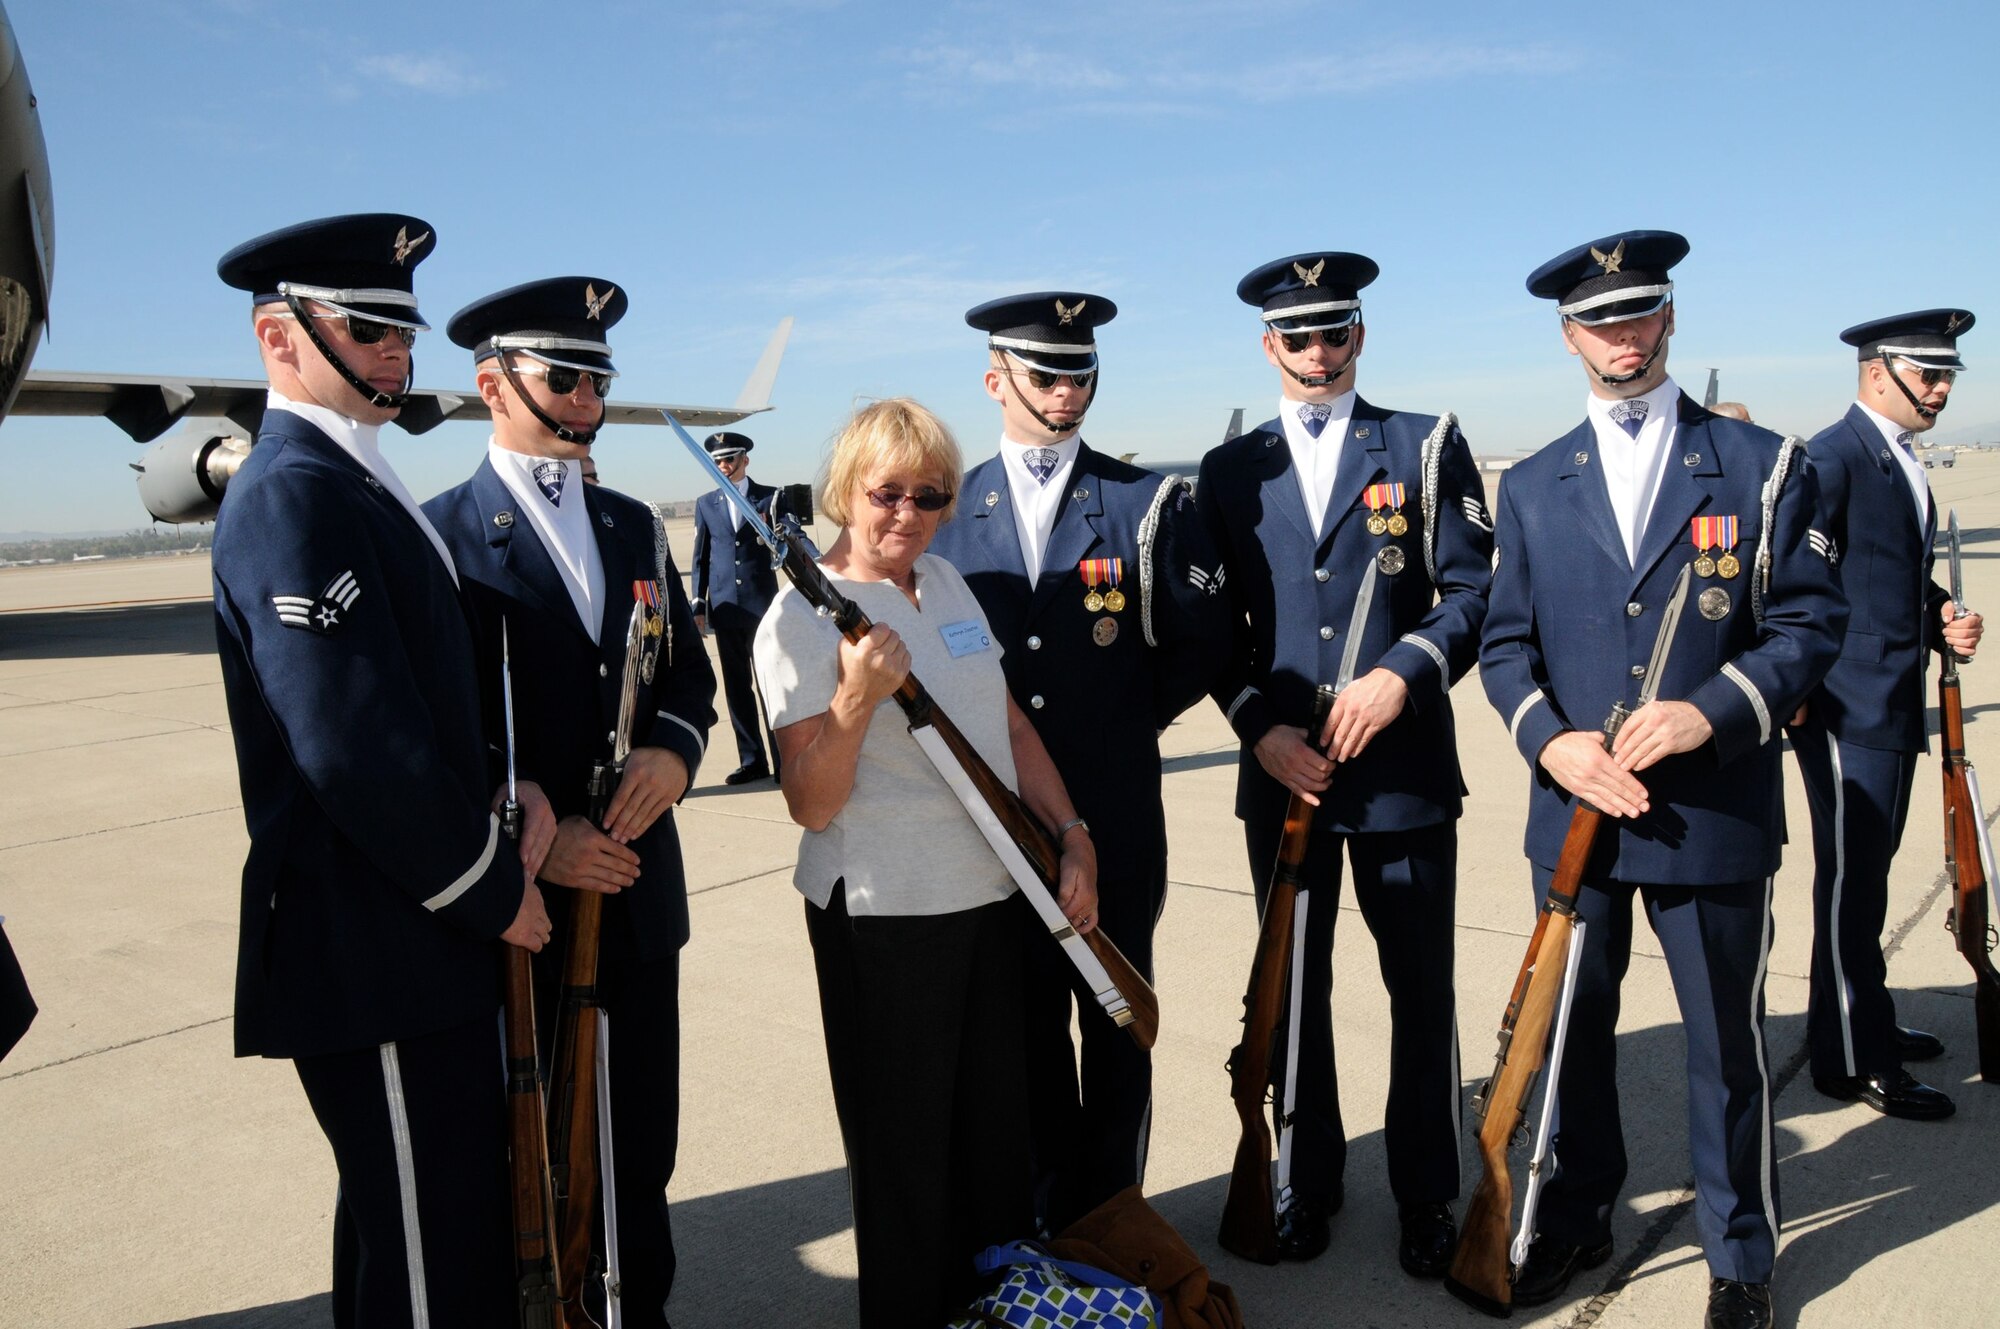 One of the members of the entertainment industry takes a picture with members of the the U.S. Air Force Honor Guard Drill Team. The team performed for members of the media and entertainment industries as part of Air Force Week. (U.S. Air Force photo by Lt. Col. Francisco Hamm)